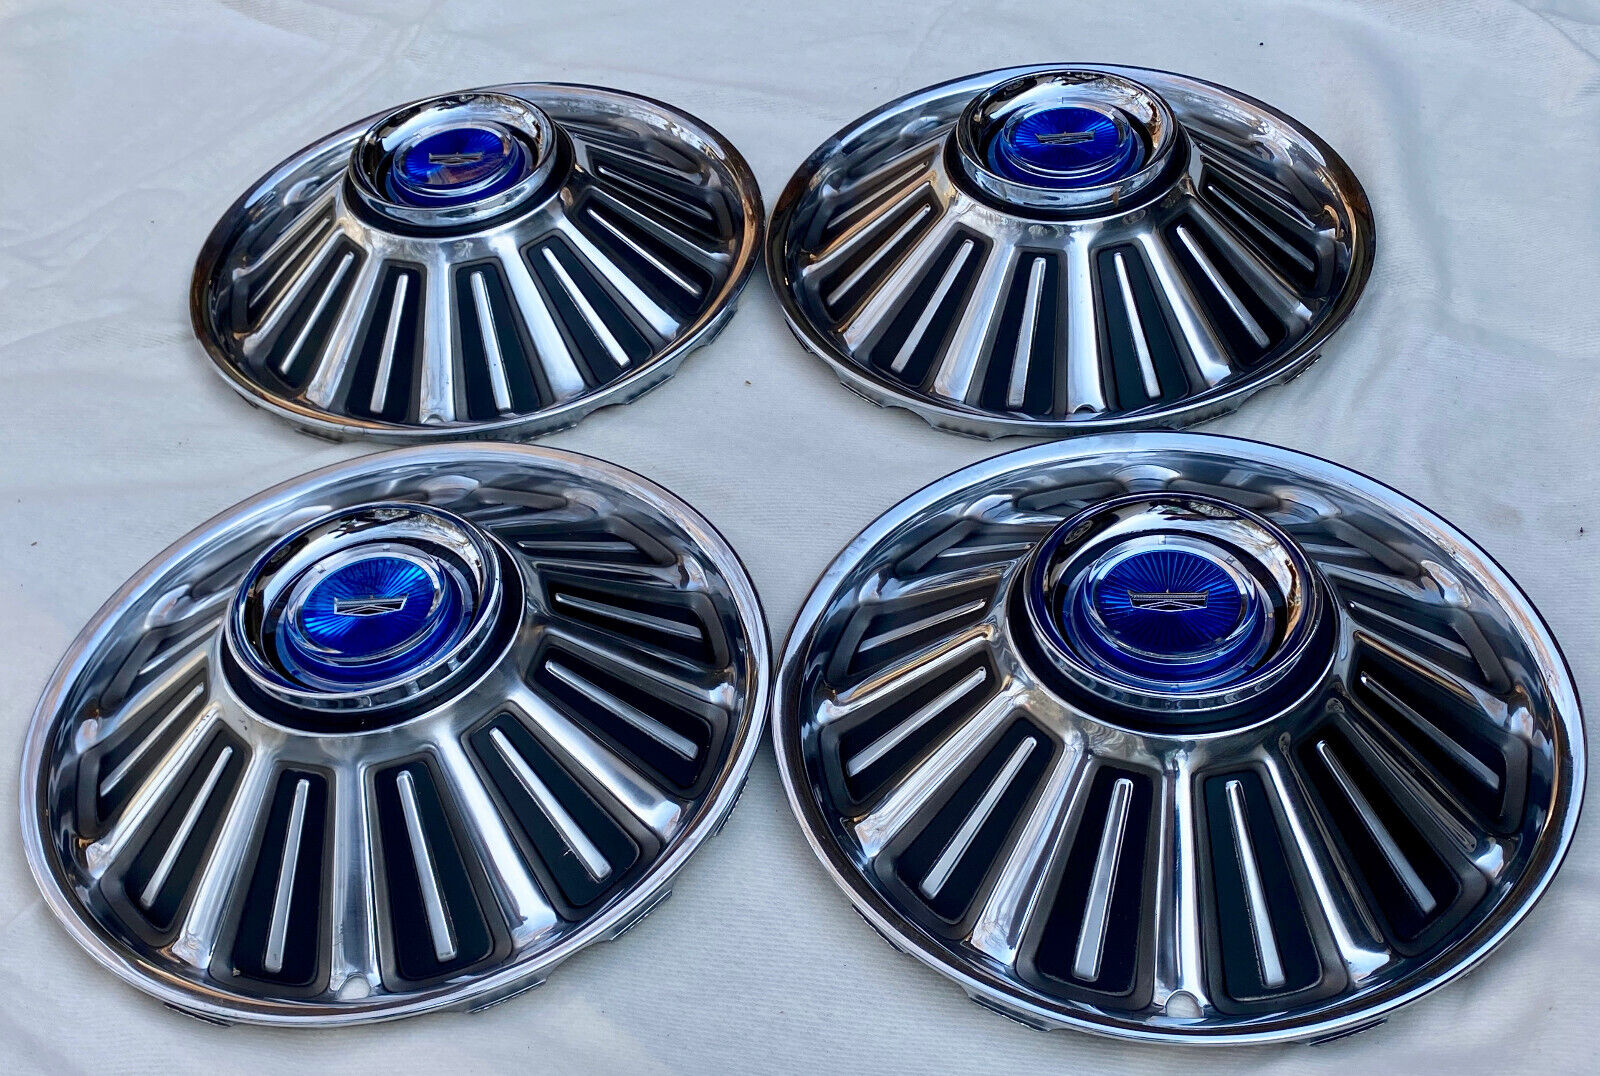 FOUR OEM NOS VINTAGE  1967 FORD FAIRLANE HUBCAPS WHEEL COVERS-C70A1130-A